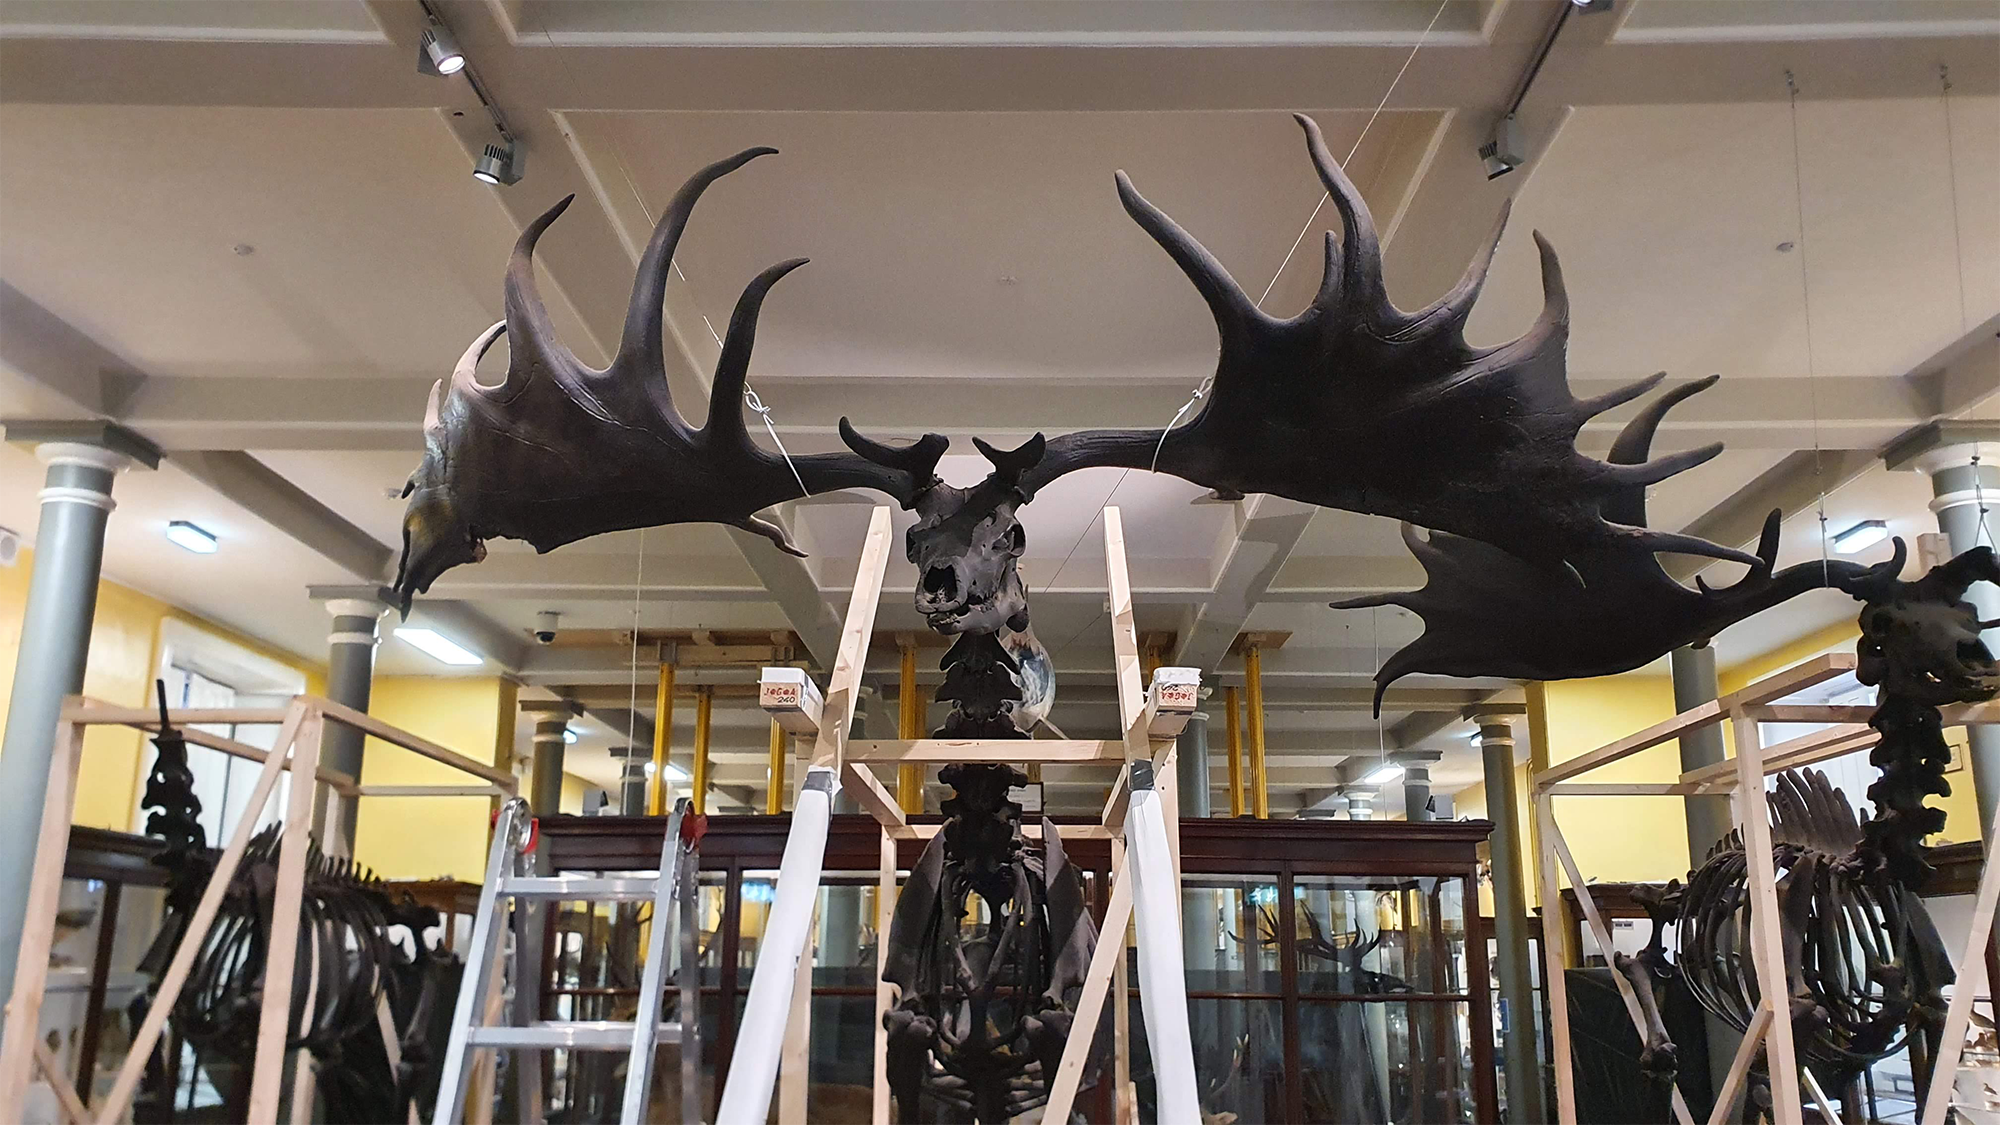 Ireland was once home to deer with massive 12-foot antlers